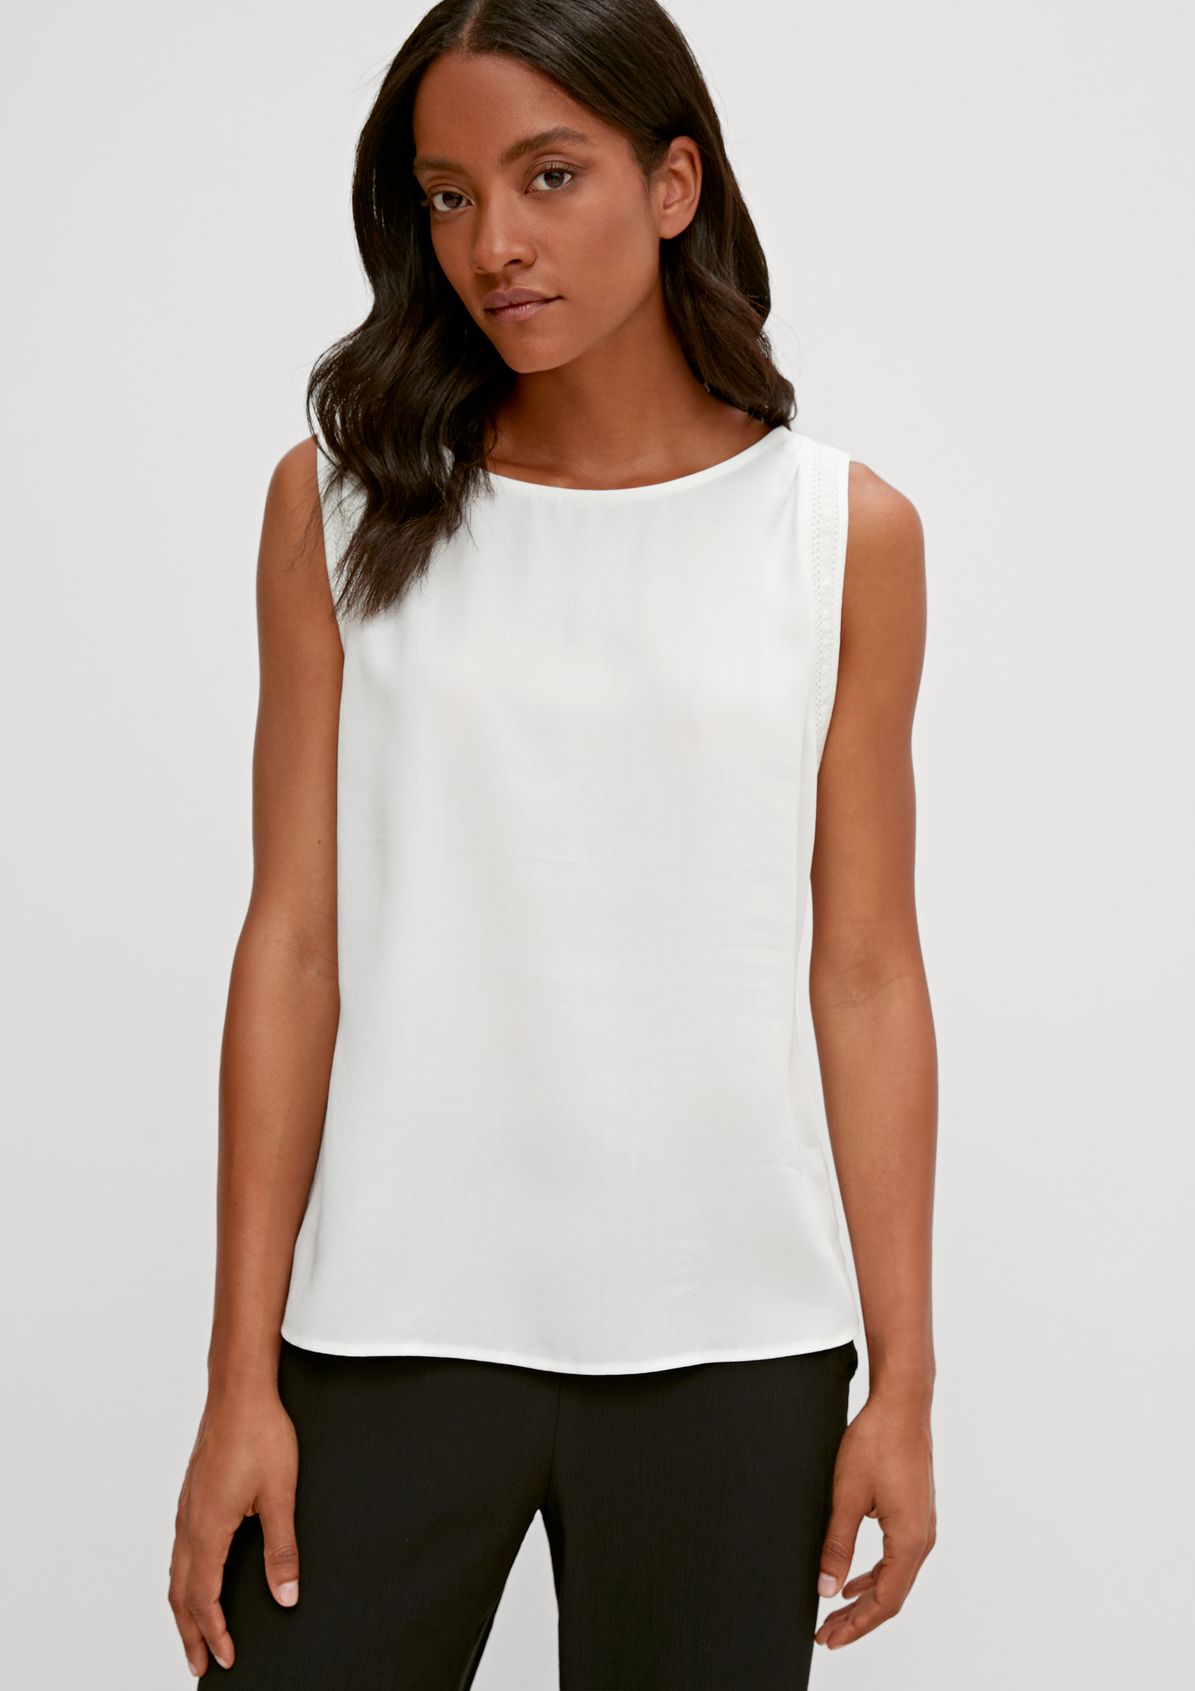 Sleeveless blouse with lace detail from comma